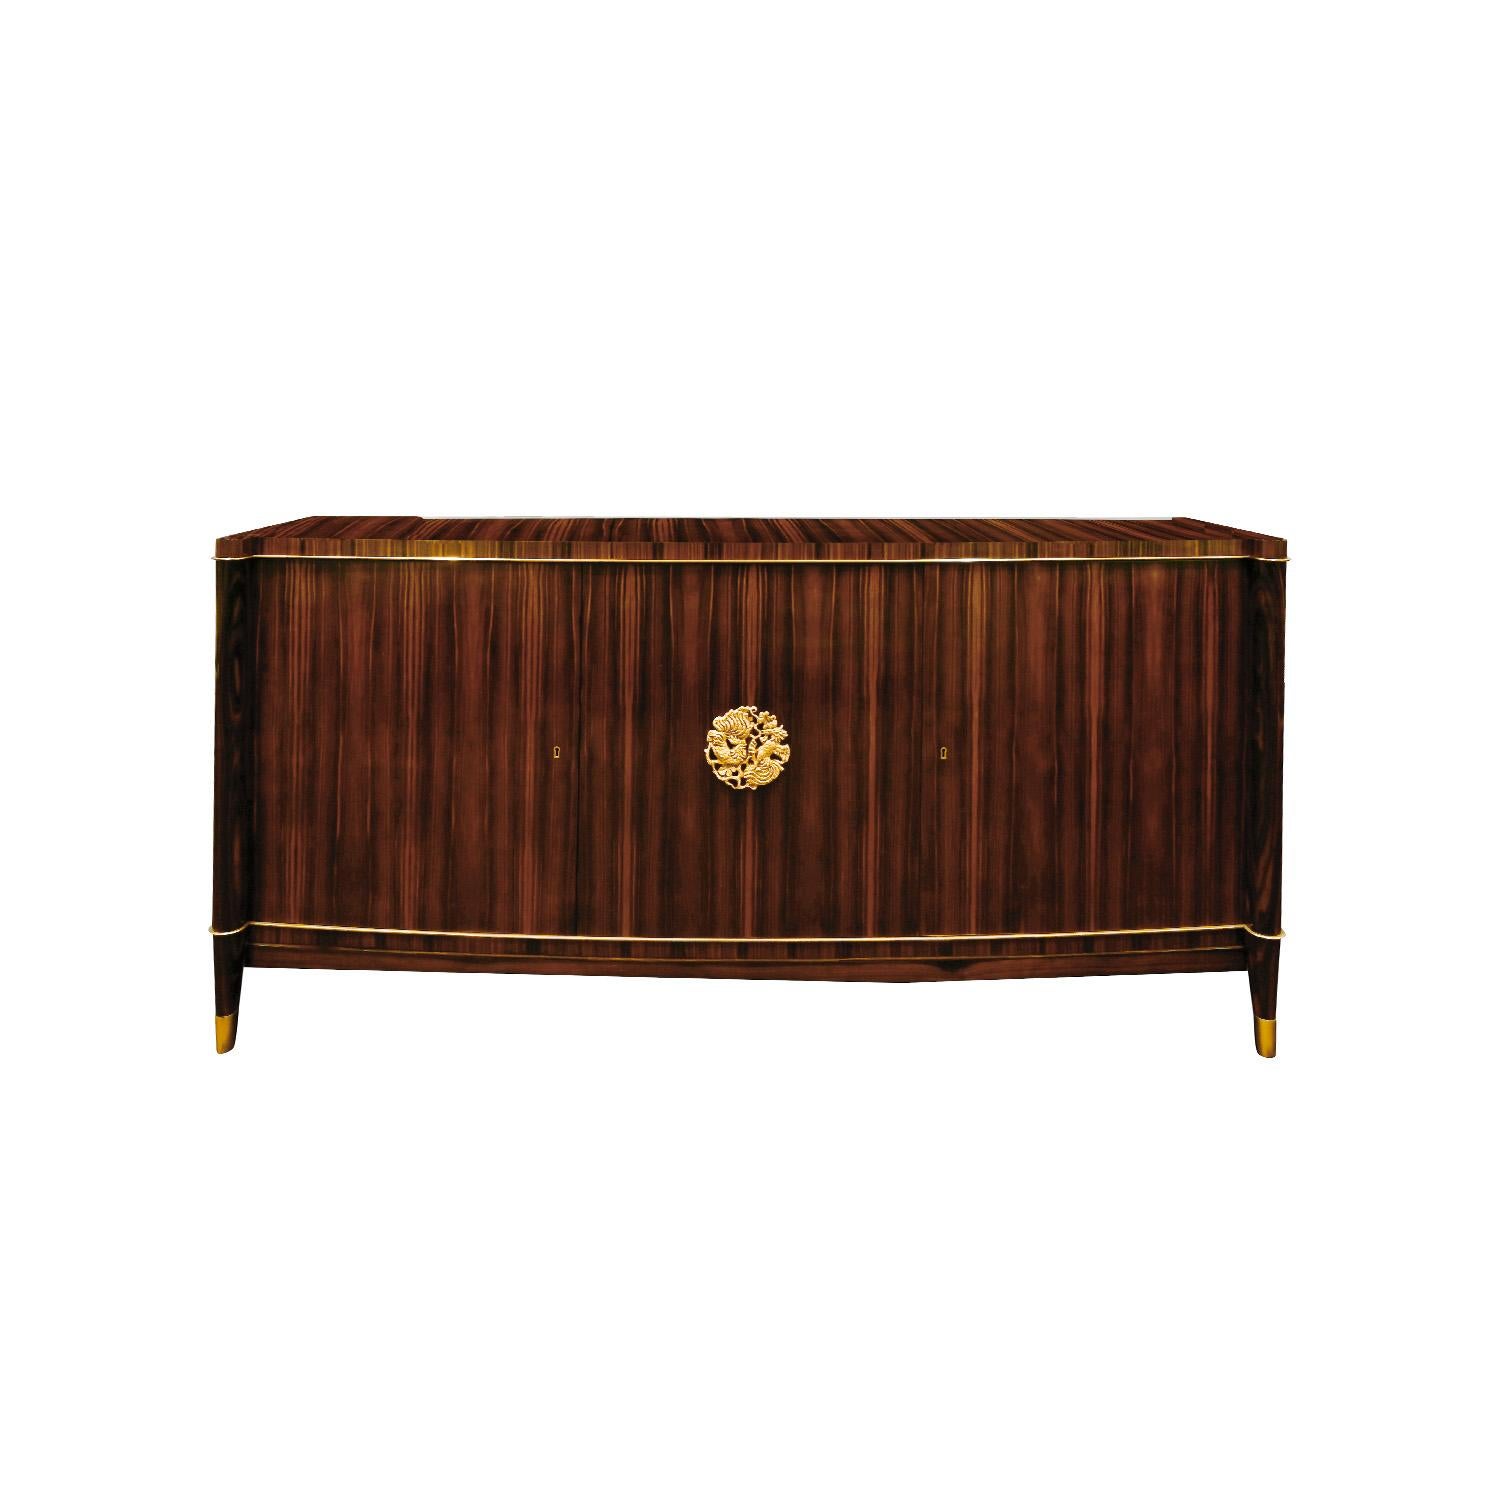 Finely crafted and elegant 3 door credenza from the 